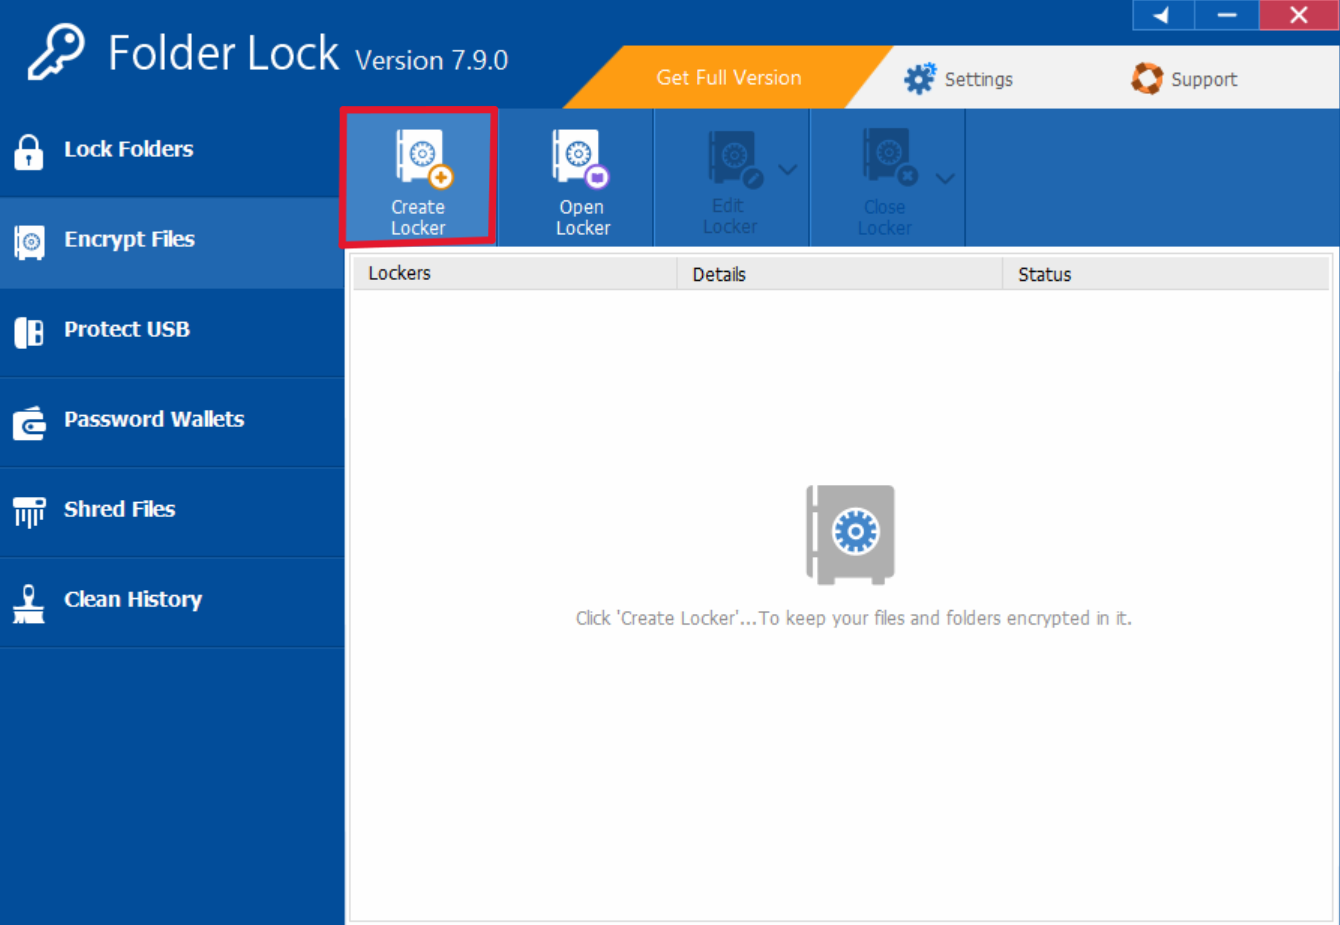 How to password protect files in folder lock? Full Guide